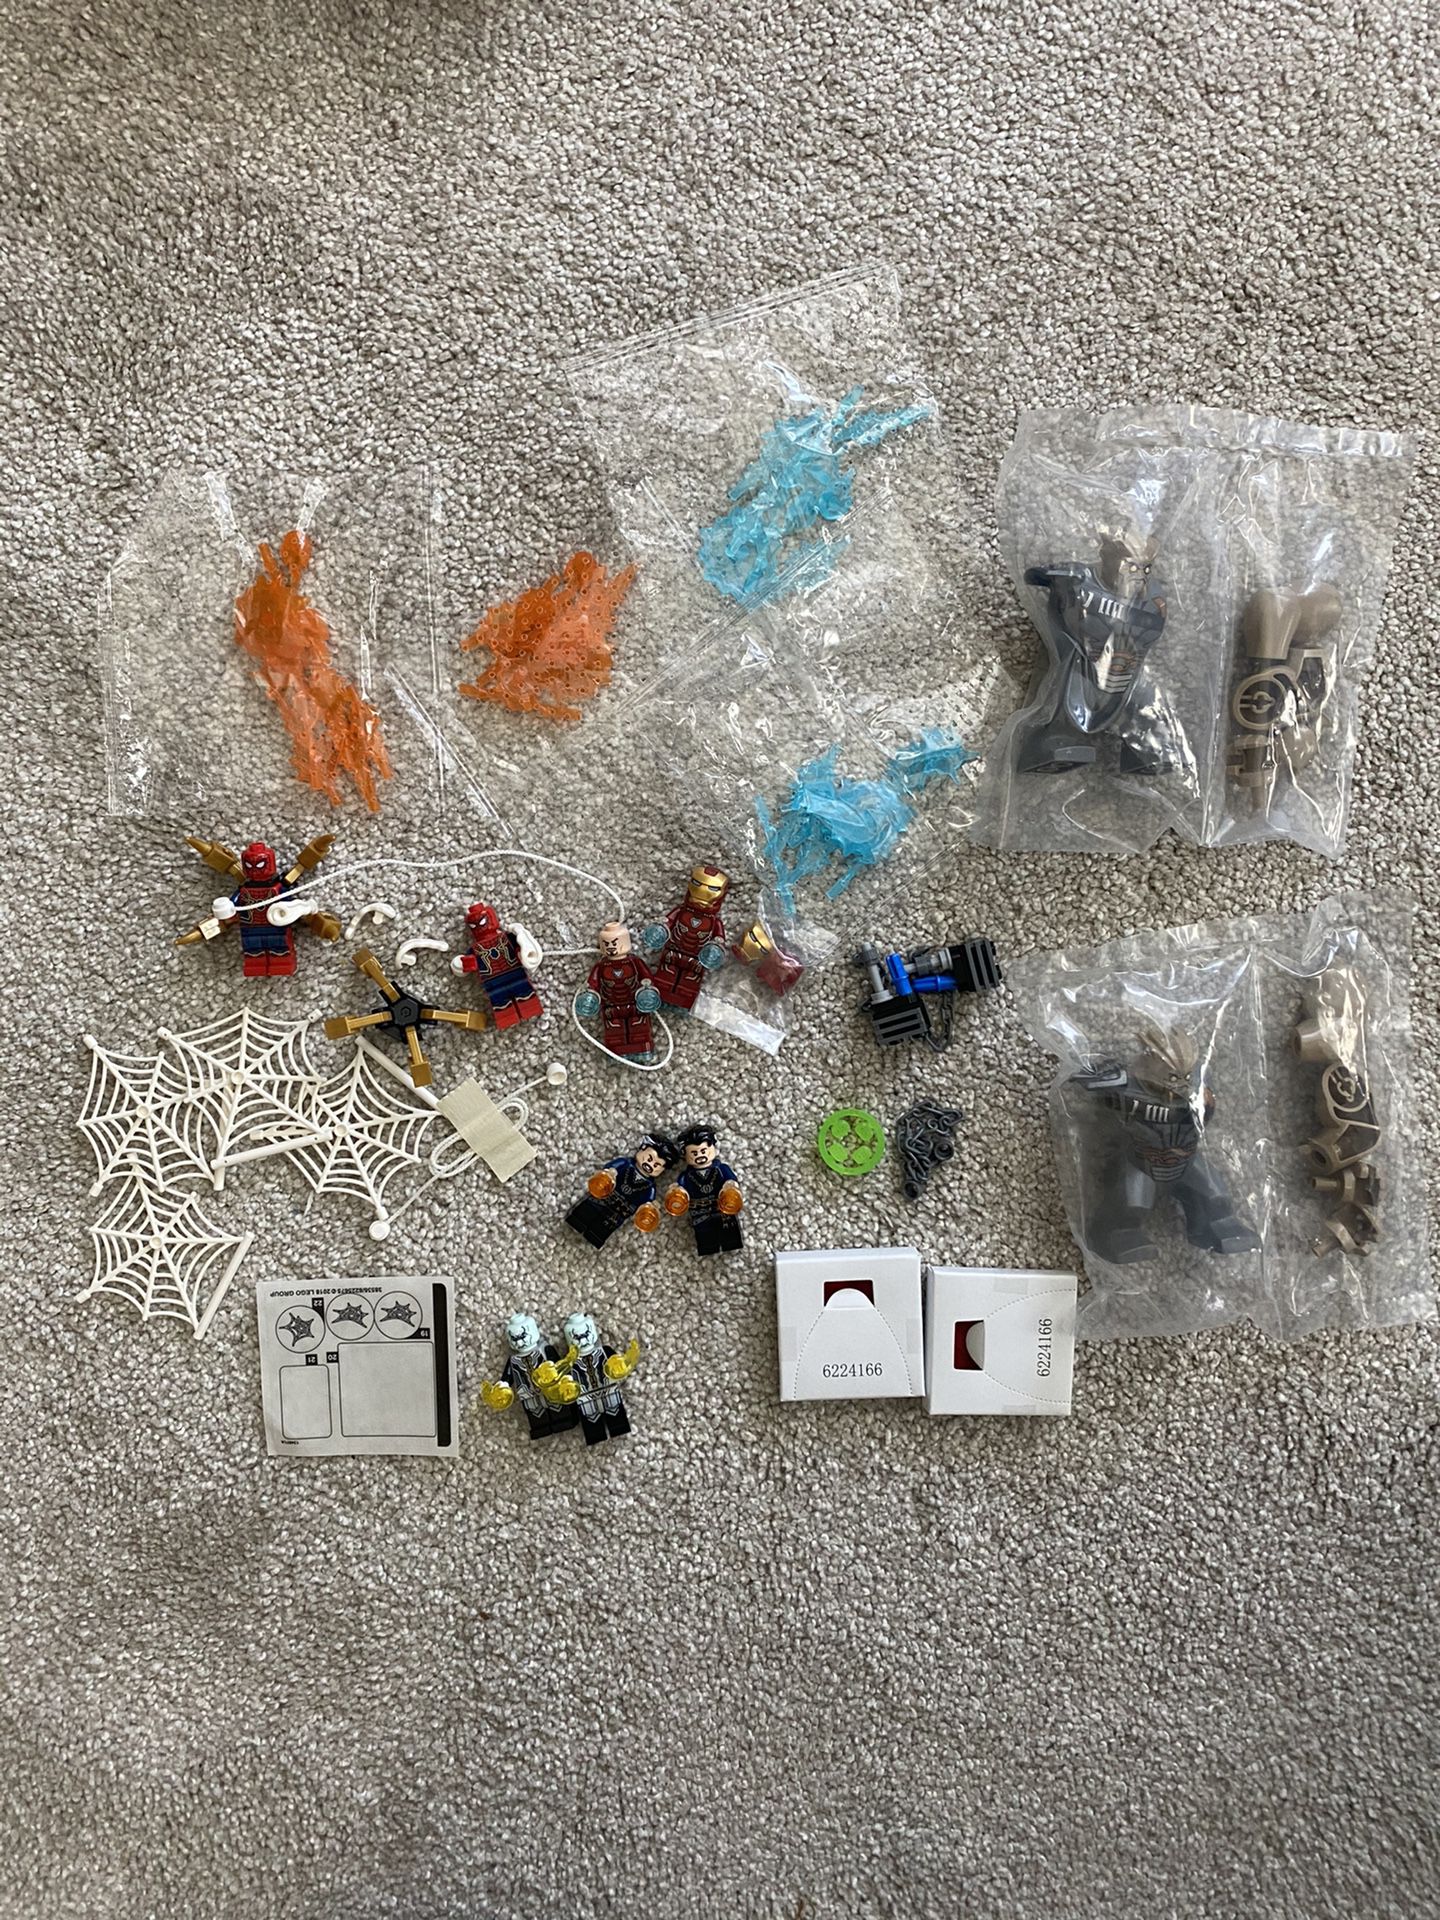 Lego super heroes / new / spiderman / iron man / dr strange and others